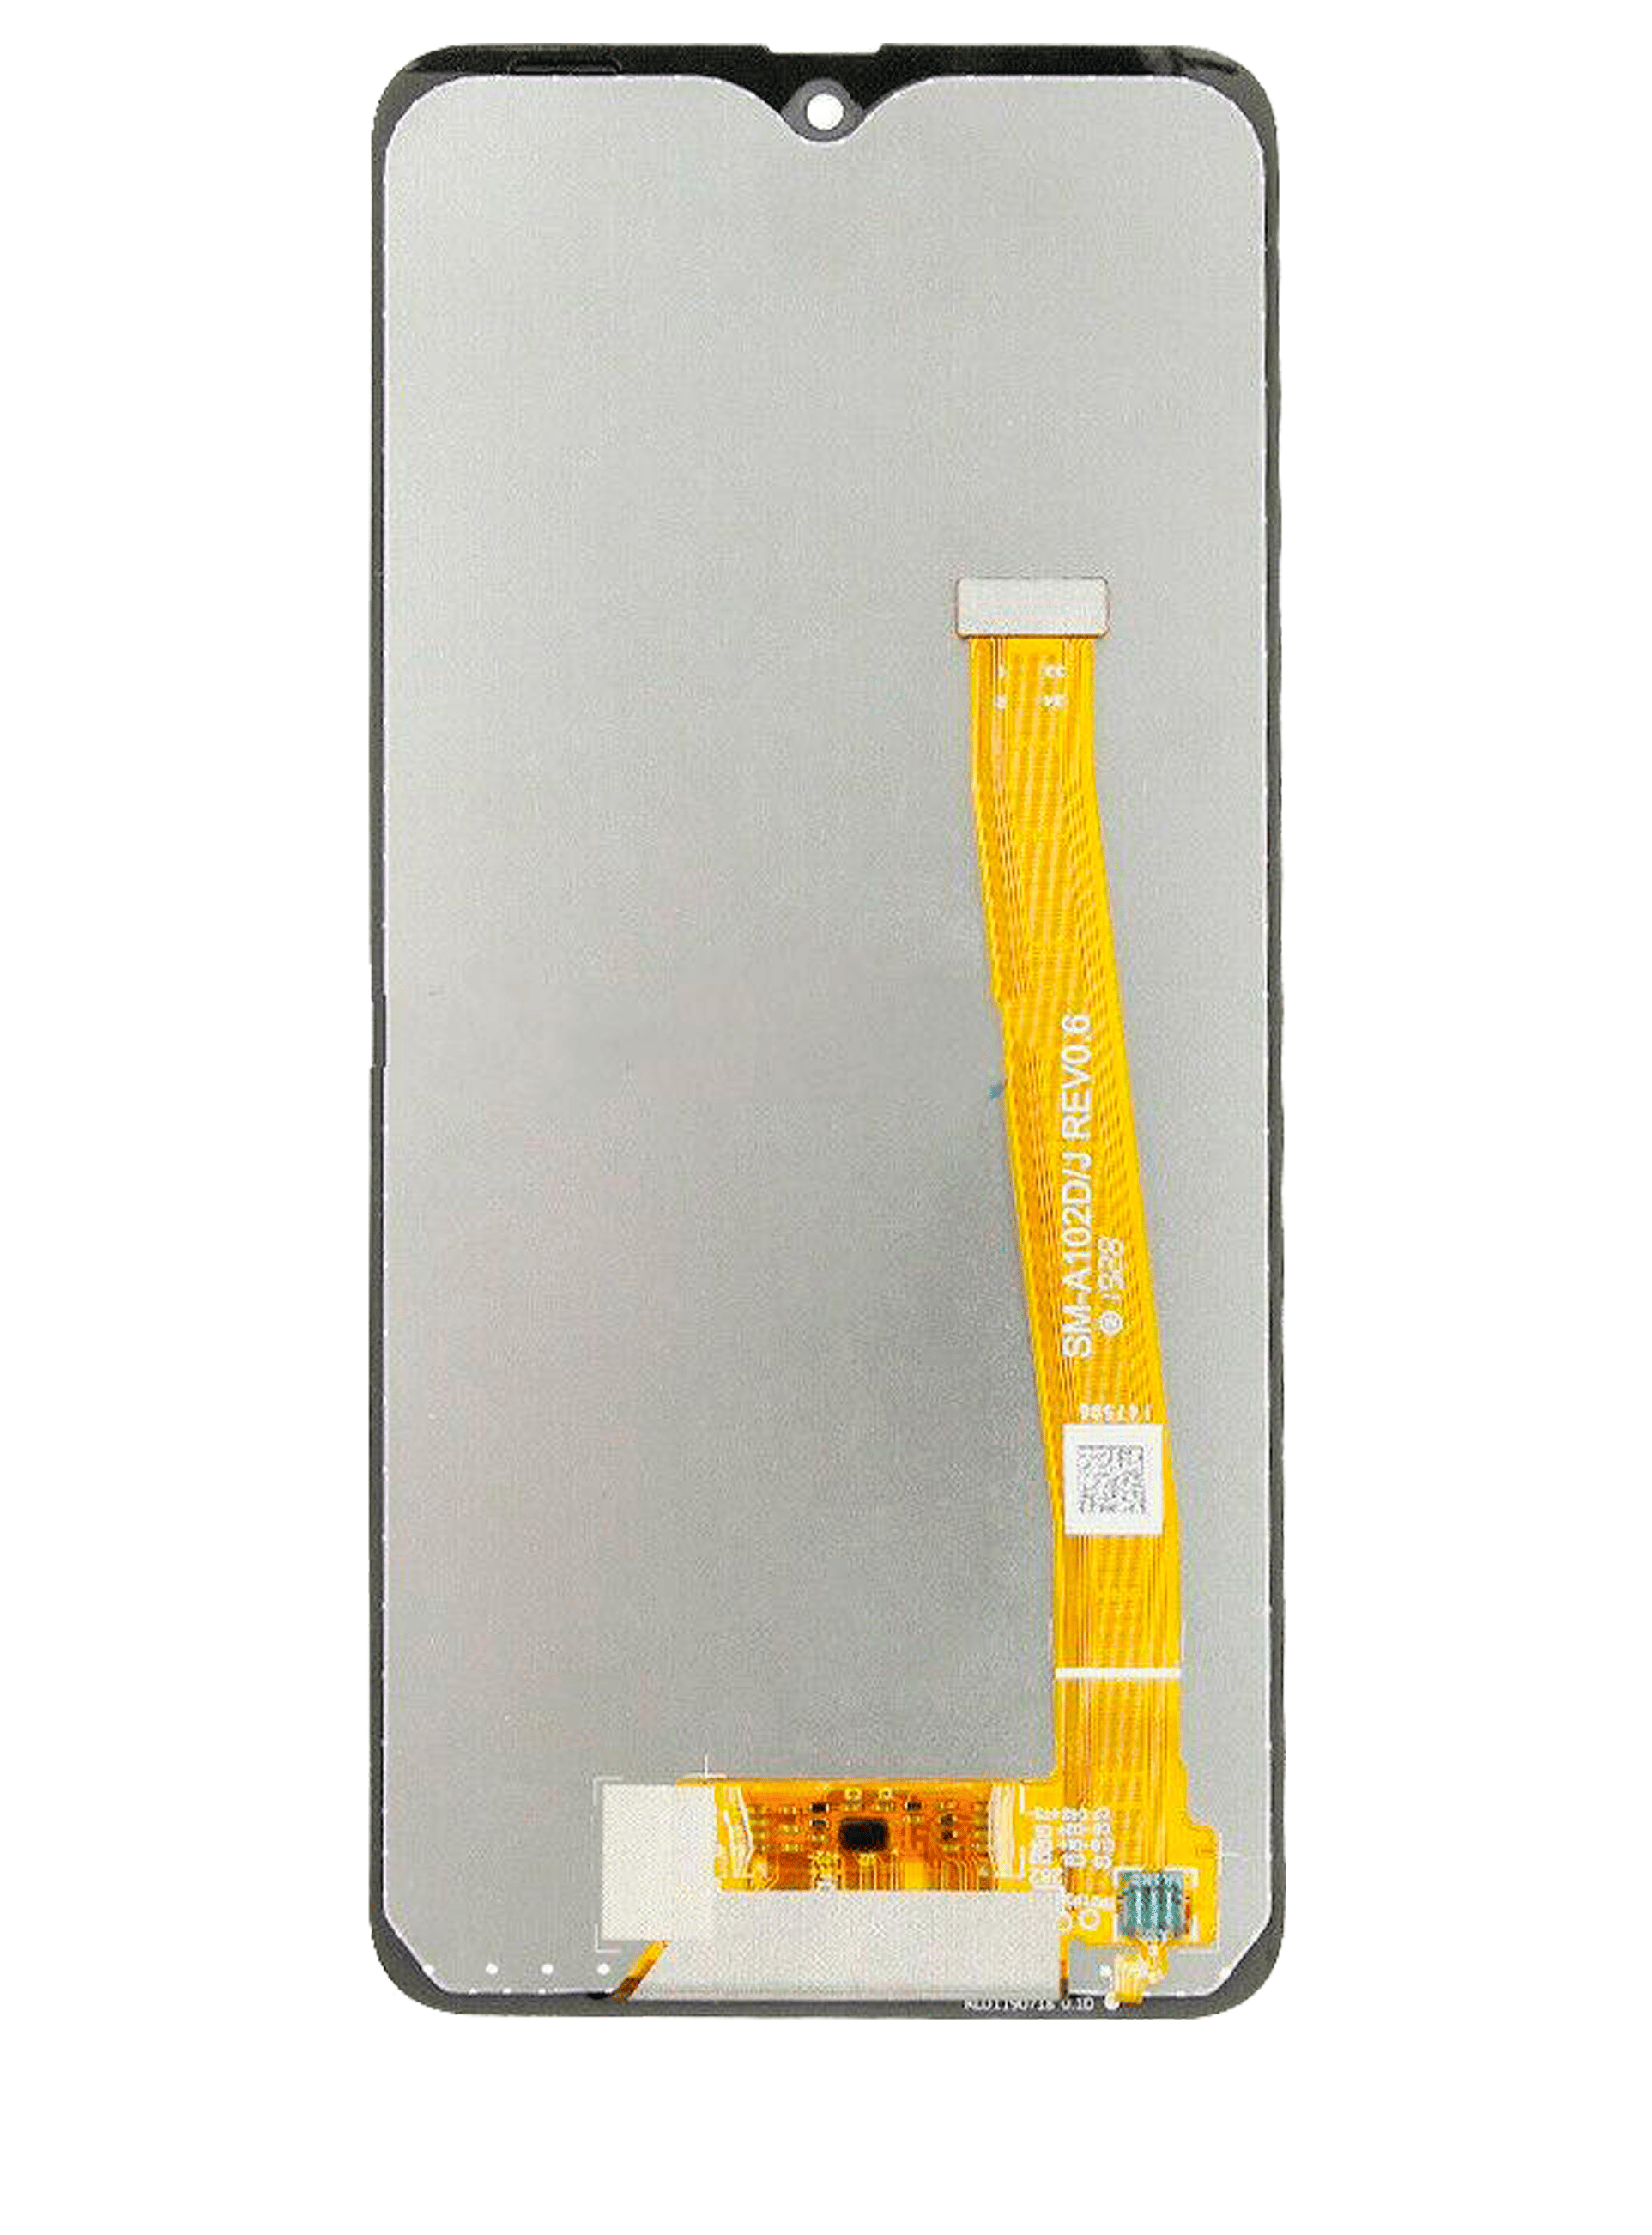 For Samsung Galaxy A10E (A102 / 2019) / A20E (A202 / 2019) LCD Screen Replacement Without Frame (Aftermarket Pro) (All Colors)